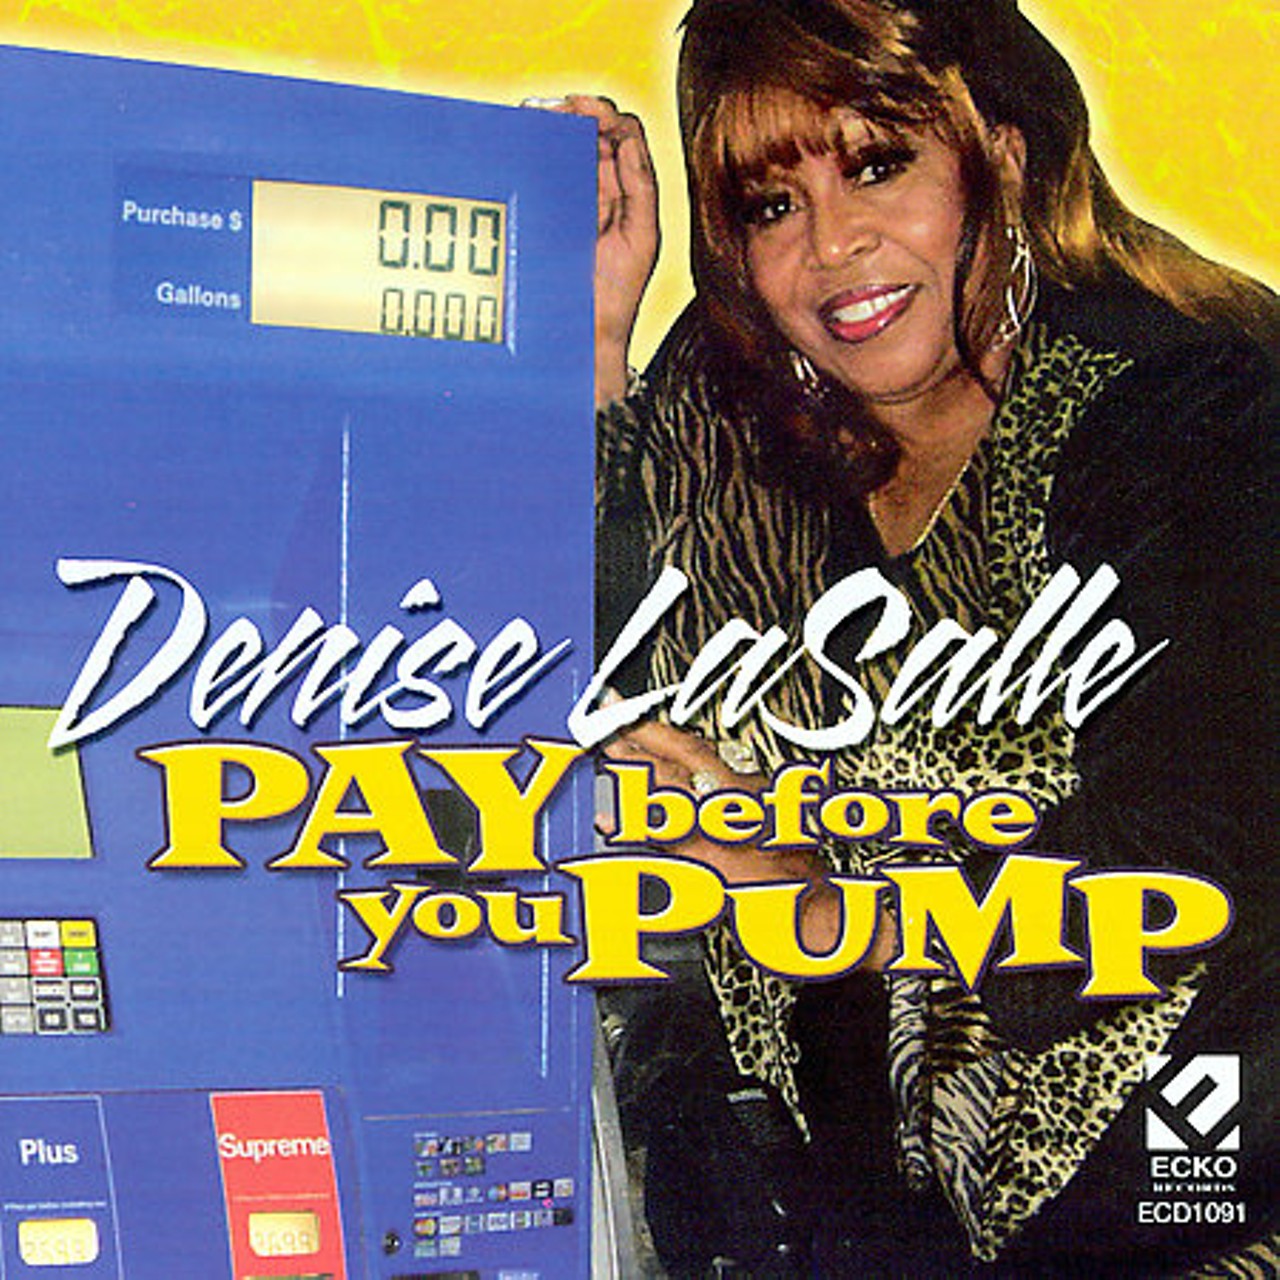 Denise LaSalle: Pay Before You Pump -- Exhibit two in Ms LaSalle's case as the most bad-ass woman in music.